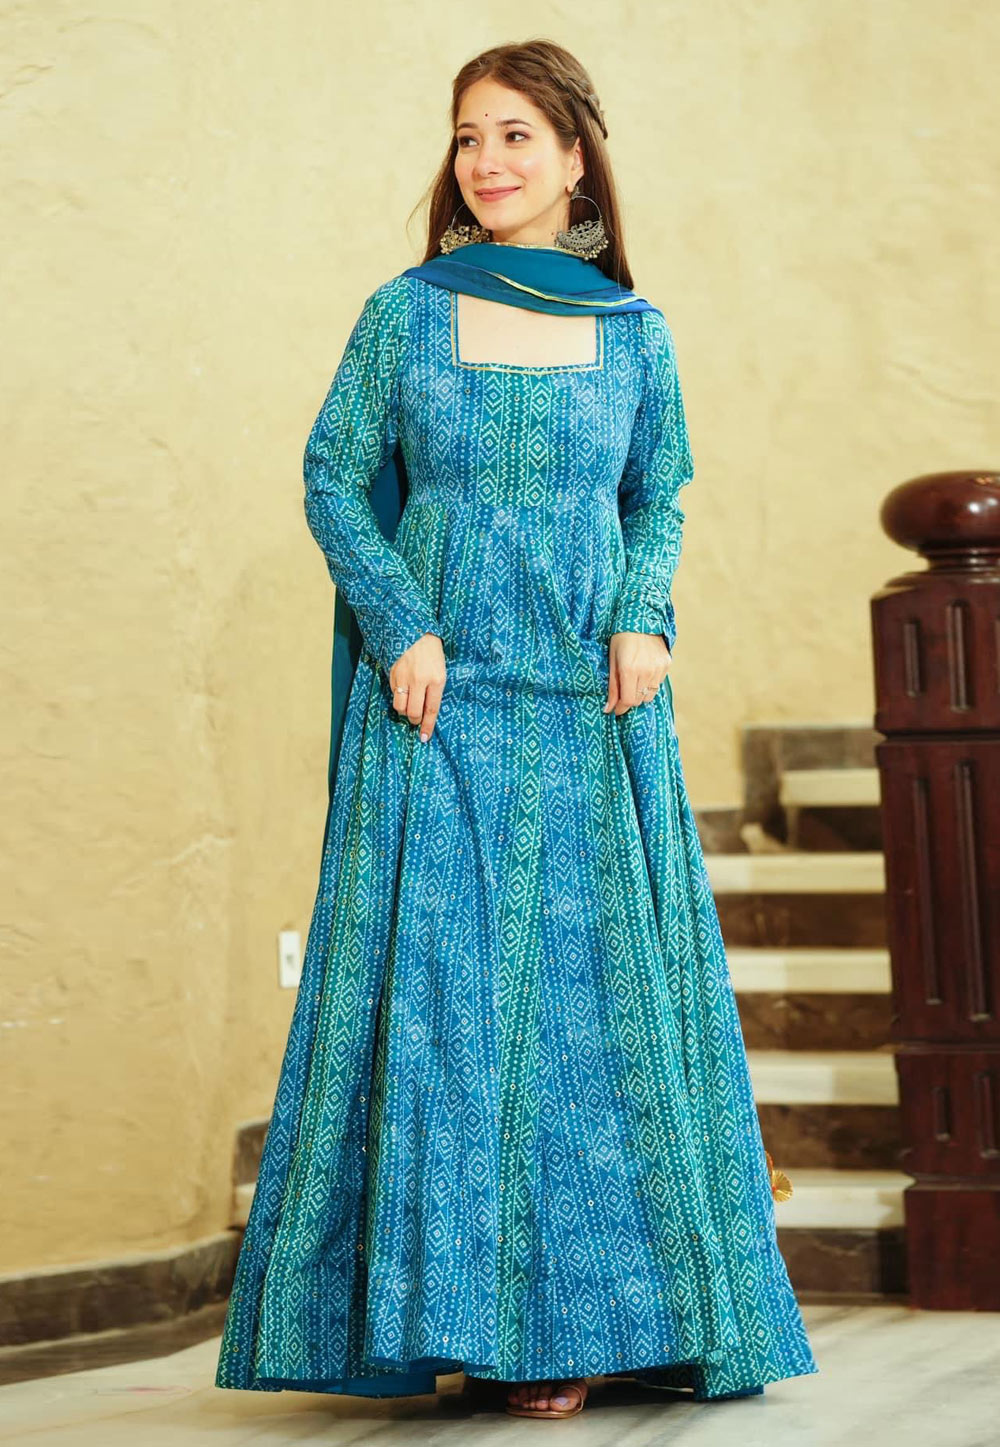 Beautiful Hand Embroidered Long Dress with modern silhouettes and superb  embellishments. | Indian gowns dresses, Fashion clothes women, Heavy dresses